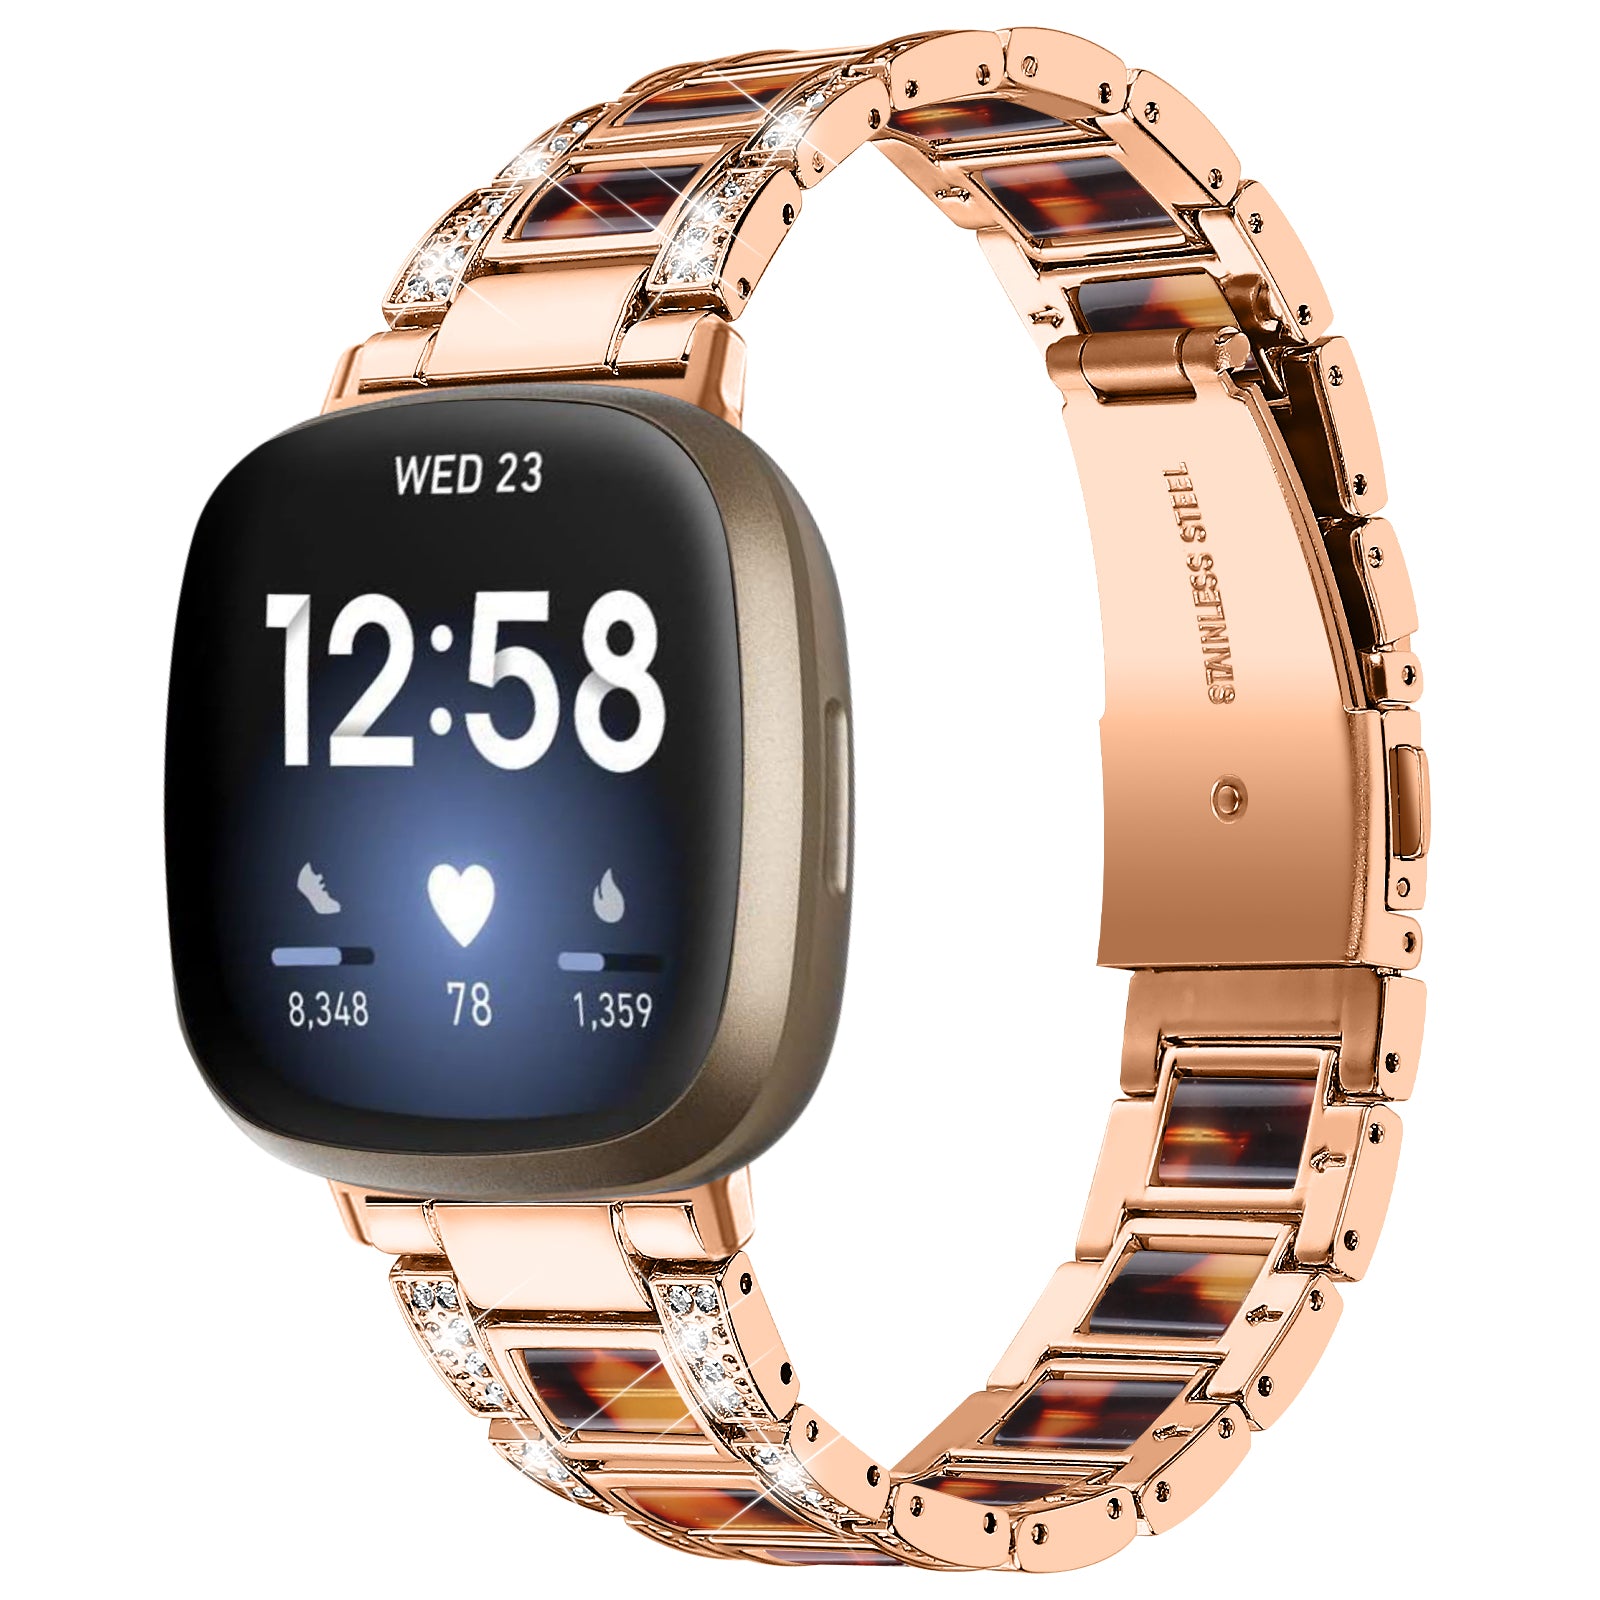 For Fitbit Versa 3 / Sense Stainless Steel Resin Smart Watch Band Replacement Rhinestone Decor Fashionable Wrist Strap - Rose Gold / Tortoiseshell Color